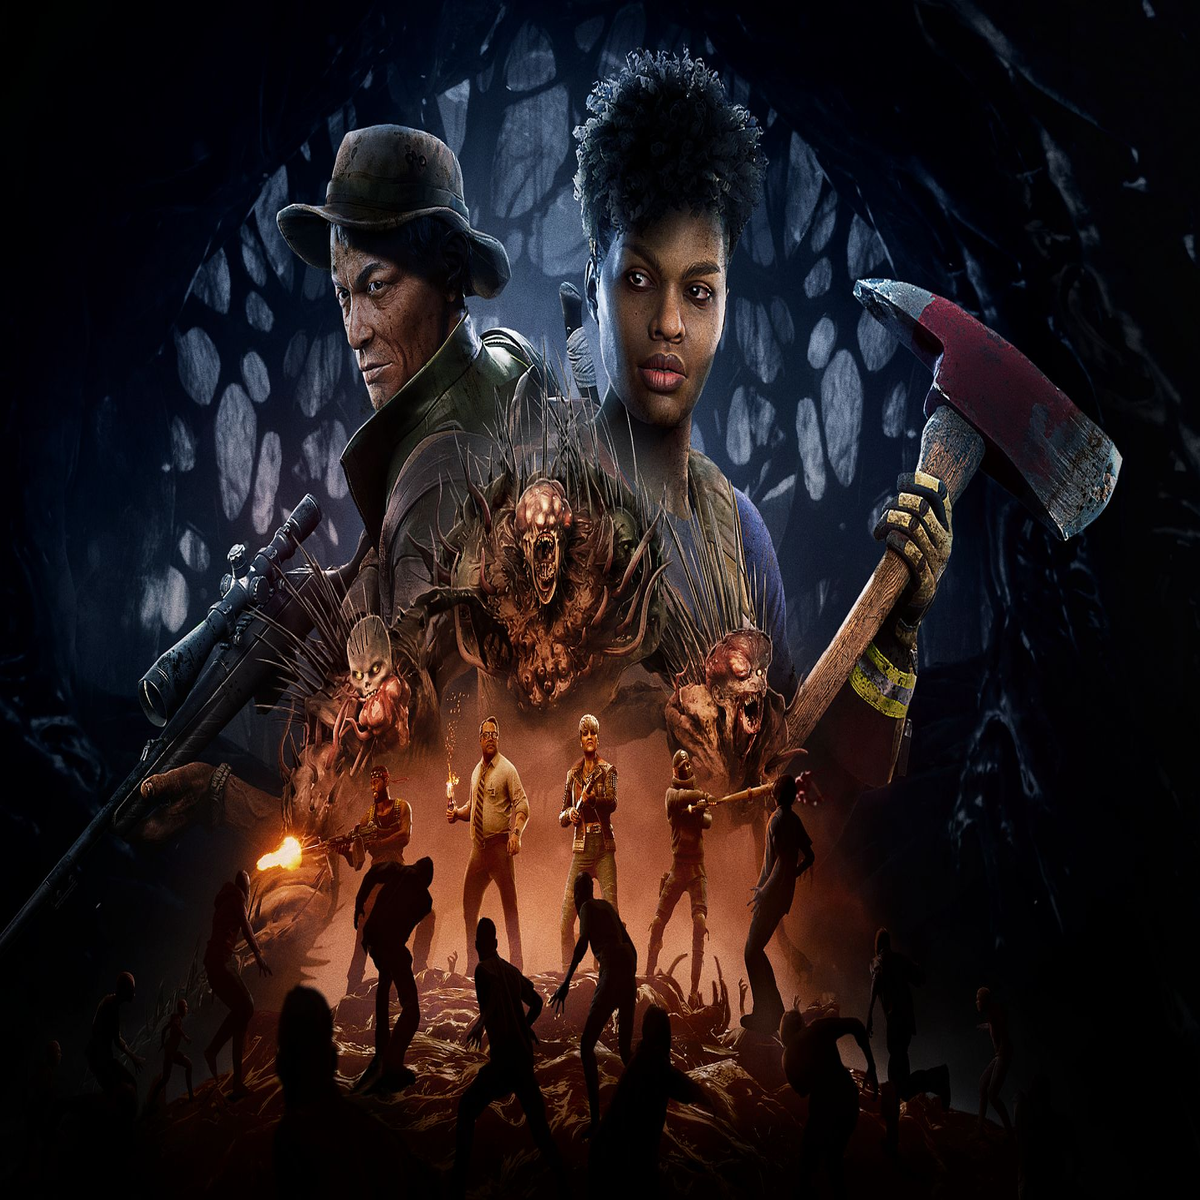 Back 4 Blood: Children of the Worm DLC [PlayStation 5]